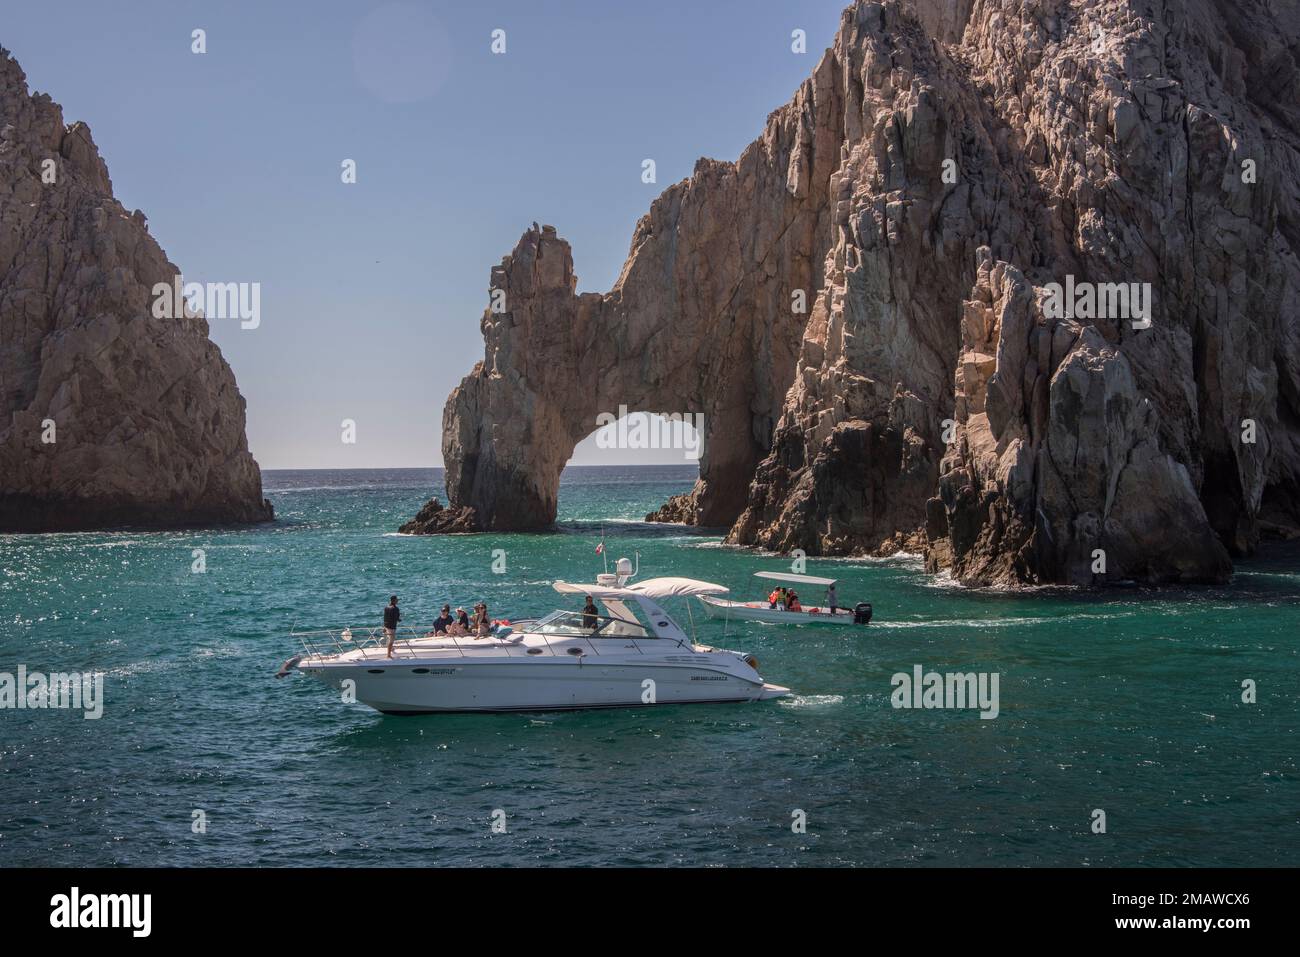 The Cabo Arch is perhaps the most famous landmark in Cabo San Lucas, Mexican Riviera, Mexico. It is only reachable via boat and sits at Land's End. Stock Photo